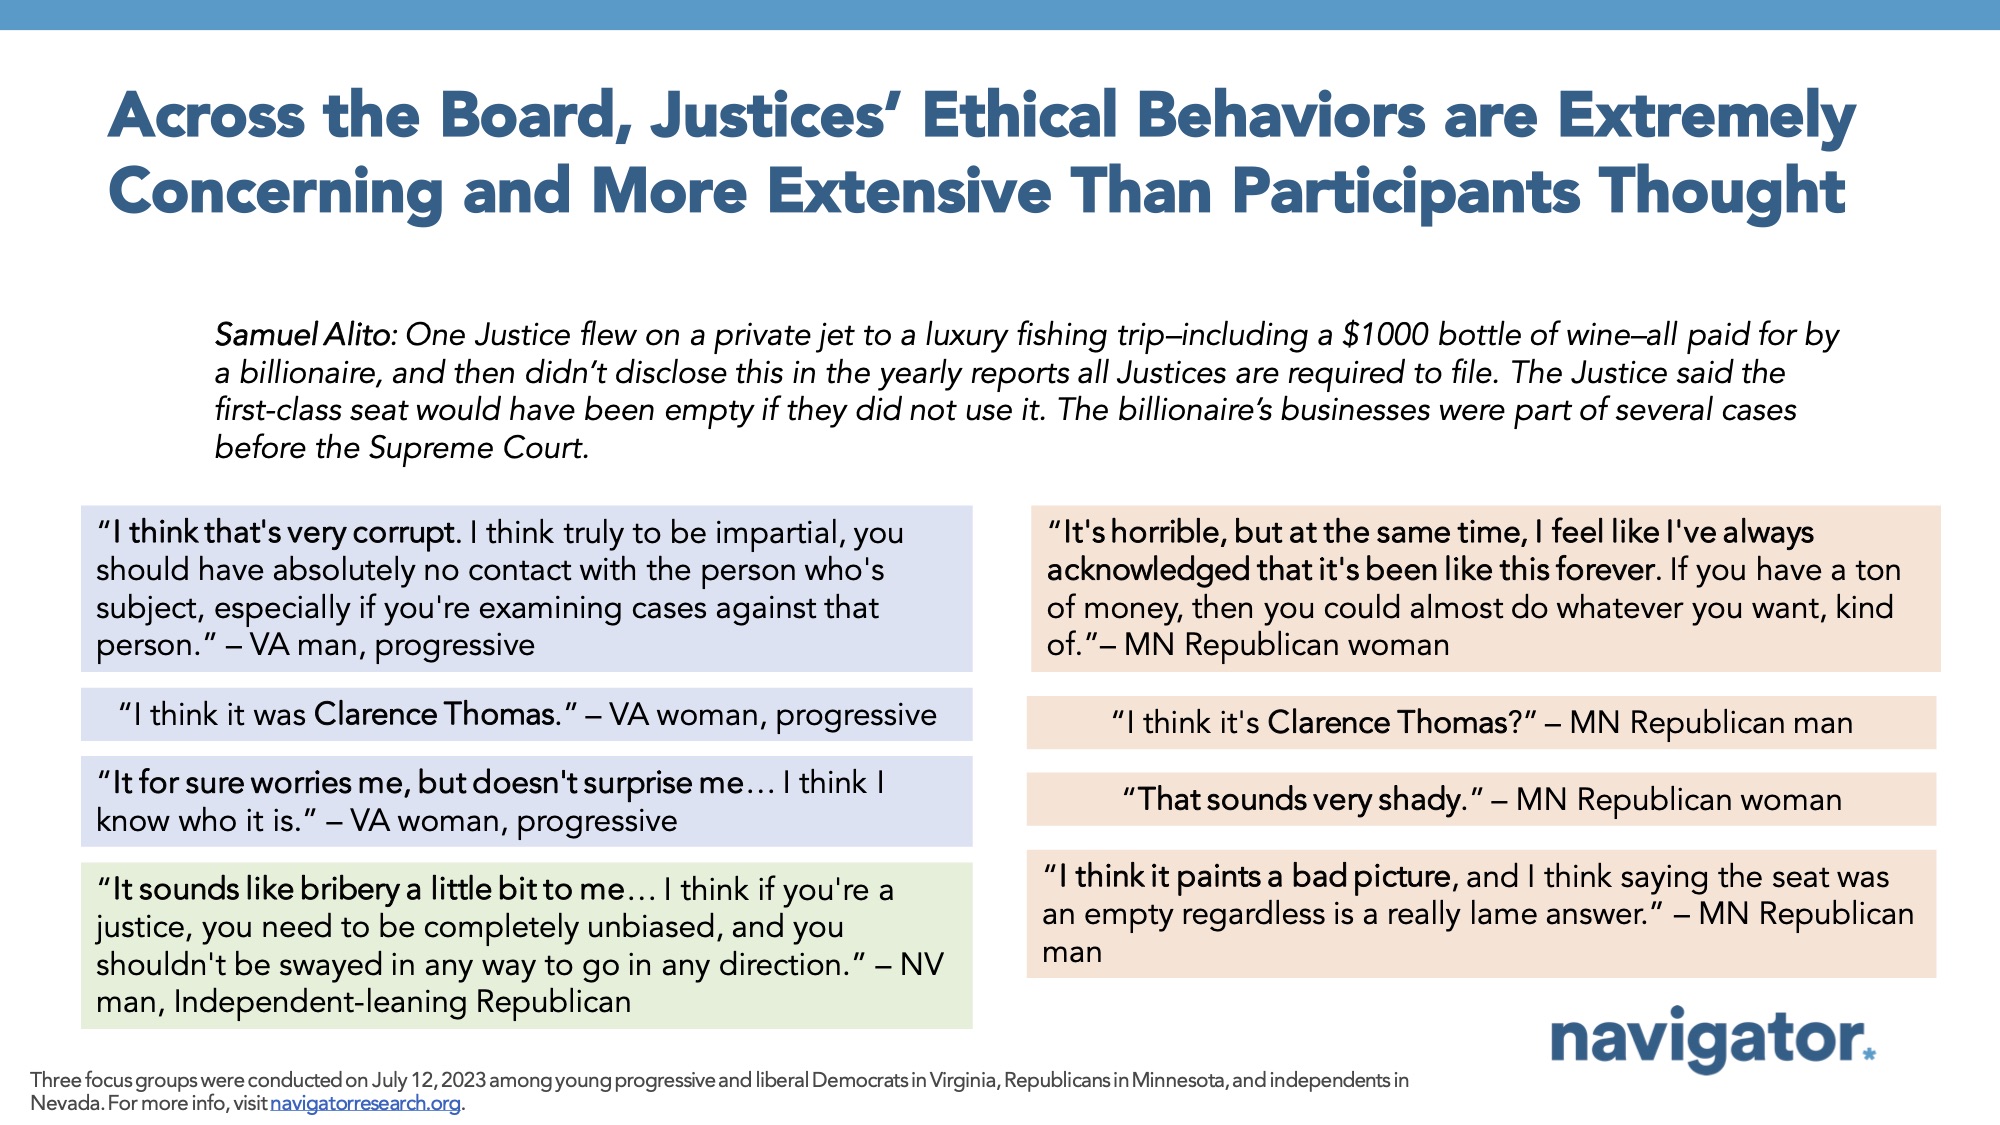 Report slide titled: Across the Board, Justices’ Ethical Behaviors are Extremely Concerning and More Extensive Than Participants Thought